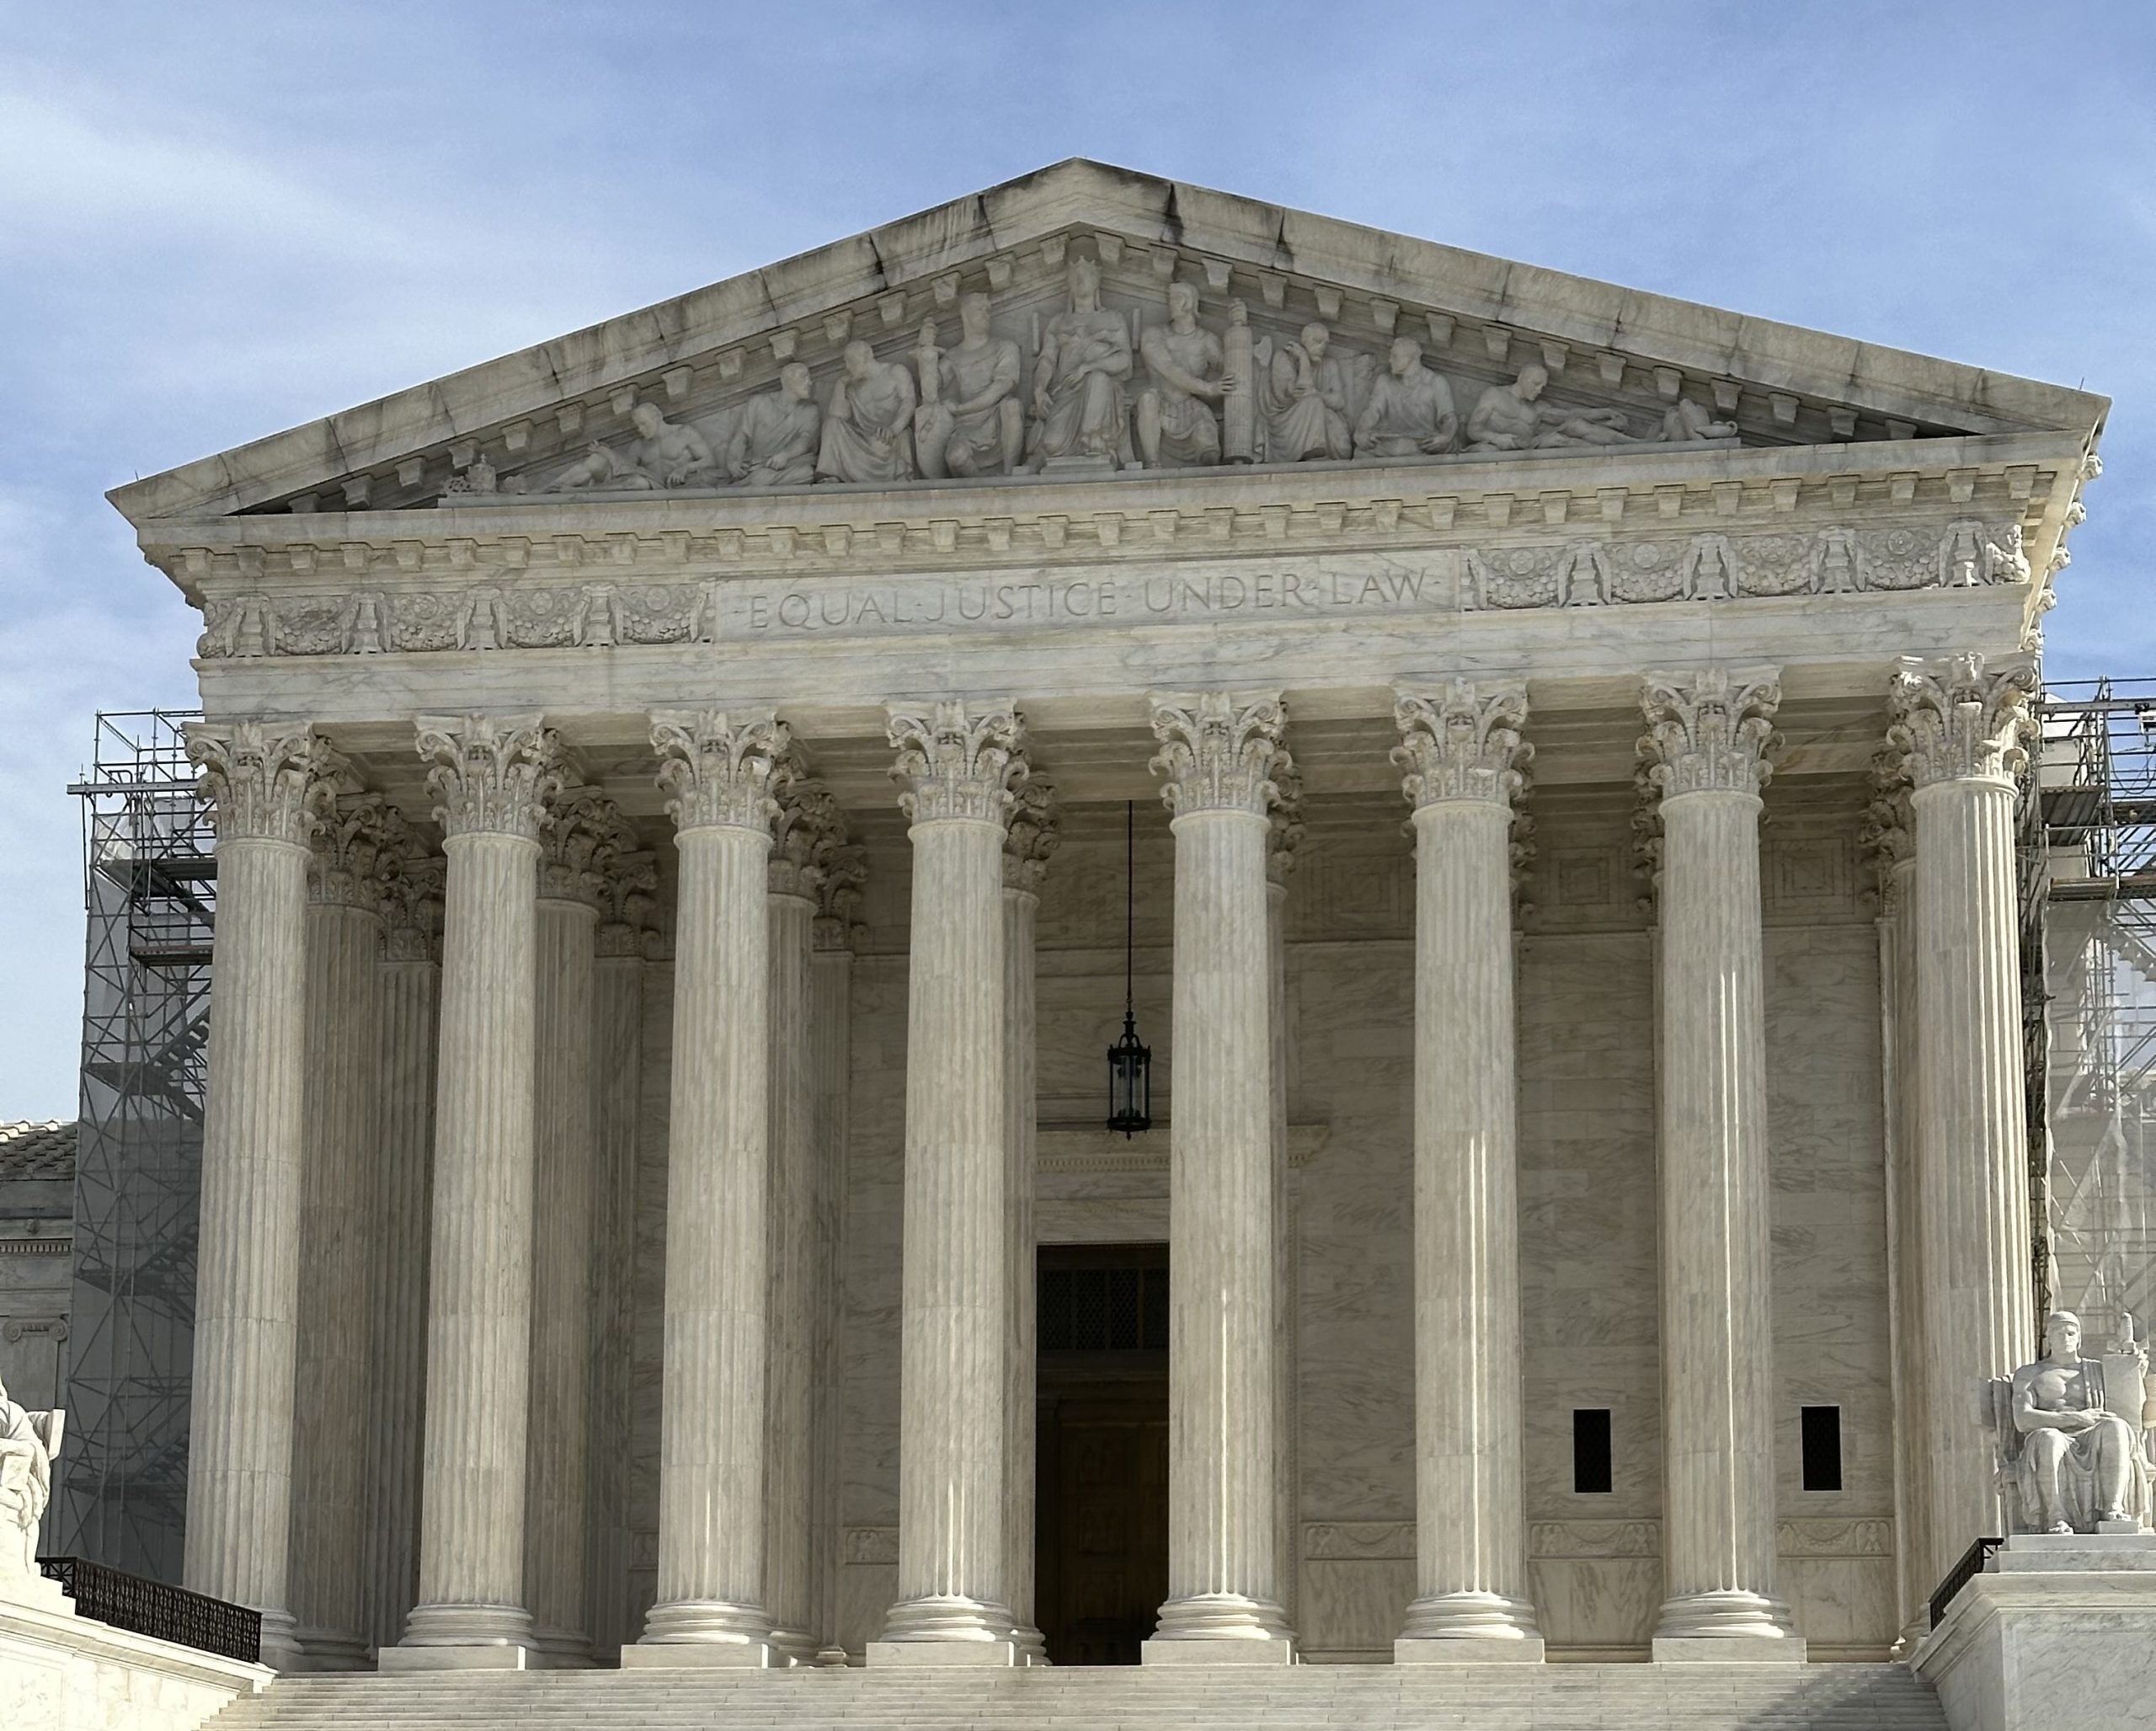 Justices dubious about dismissing suits while waiting for arbitration